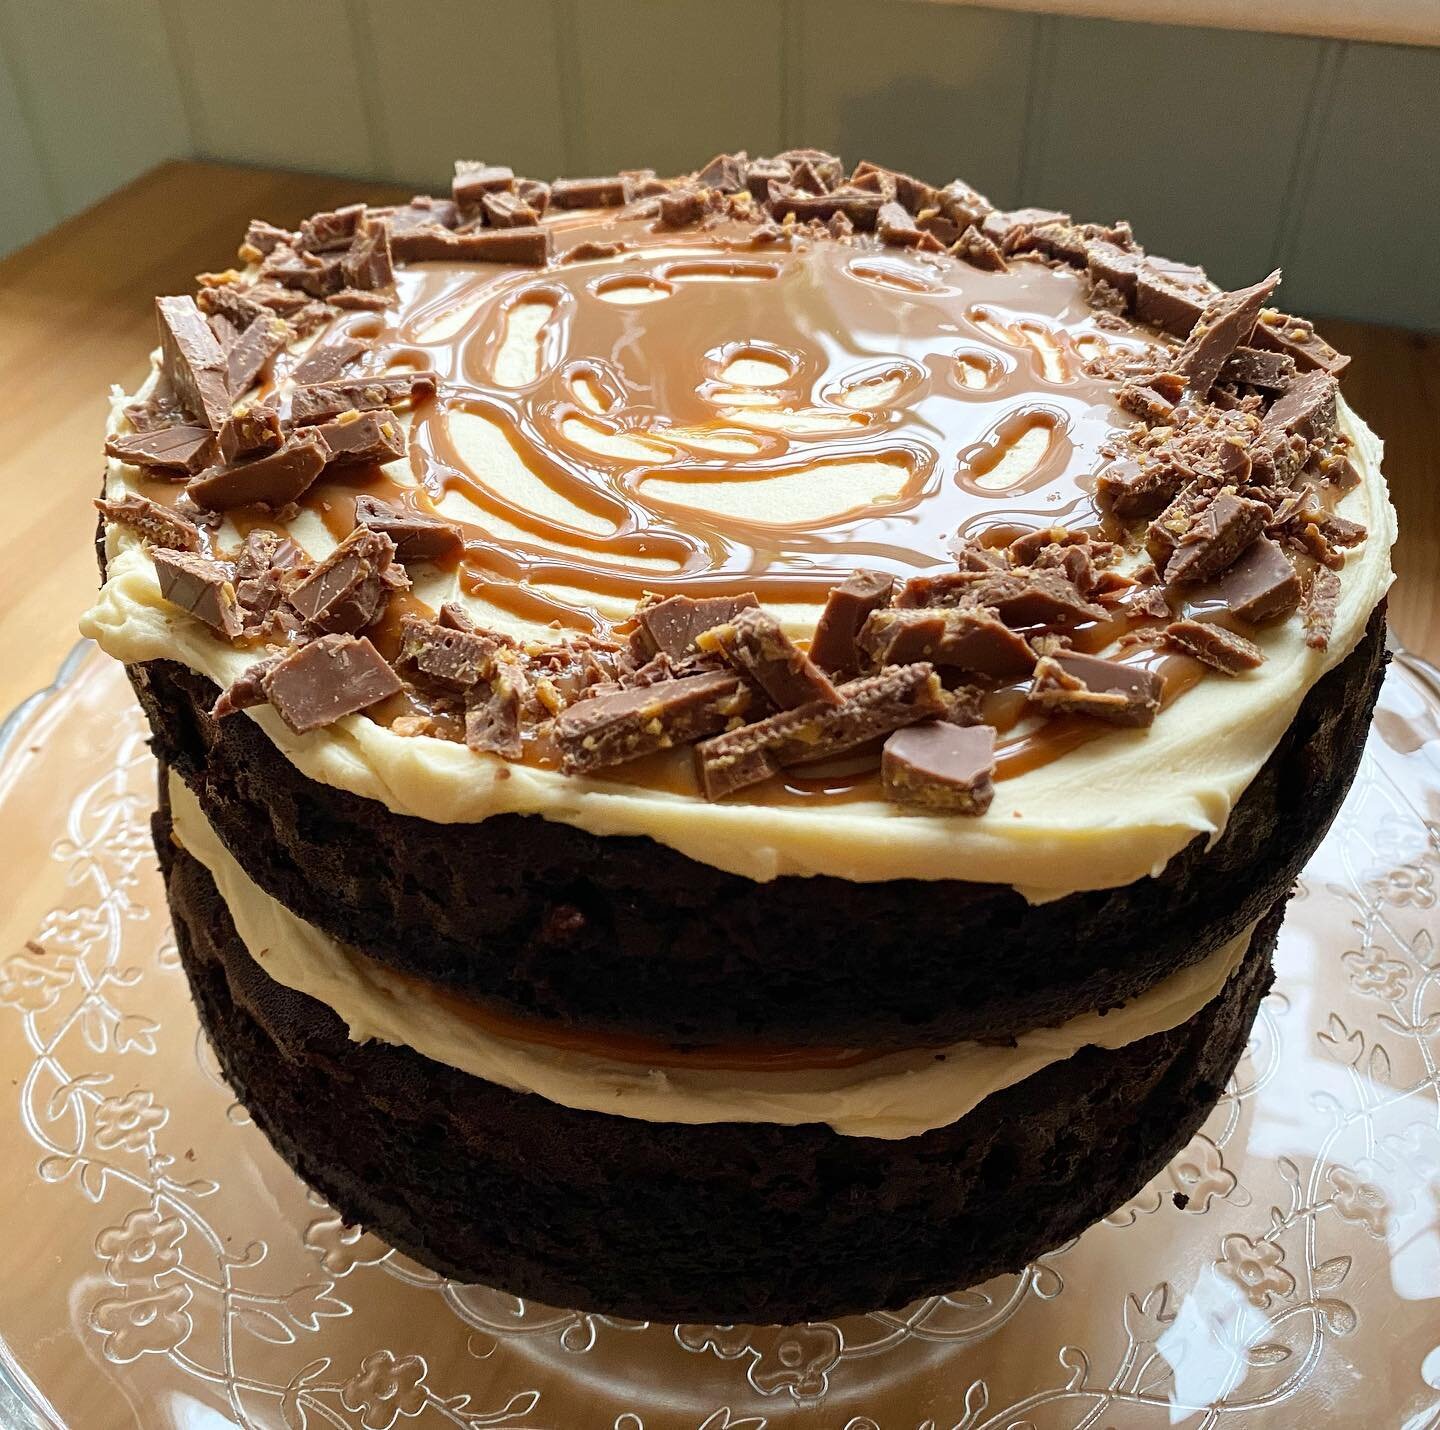 Chocolate and caramel cake - just one of the homemade goodies in our stand this week 🧁
.
.
.
#romsey #cafe #romseycafe #homemadecake #chocolatecake #chocolateandcaramel #caramelchocolatecake #teacups #hampshirecafe #testvalley